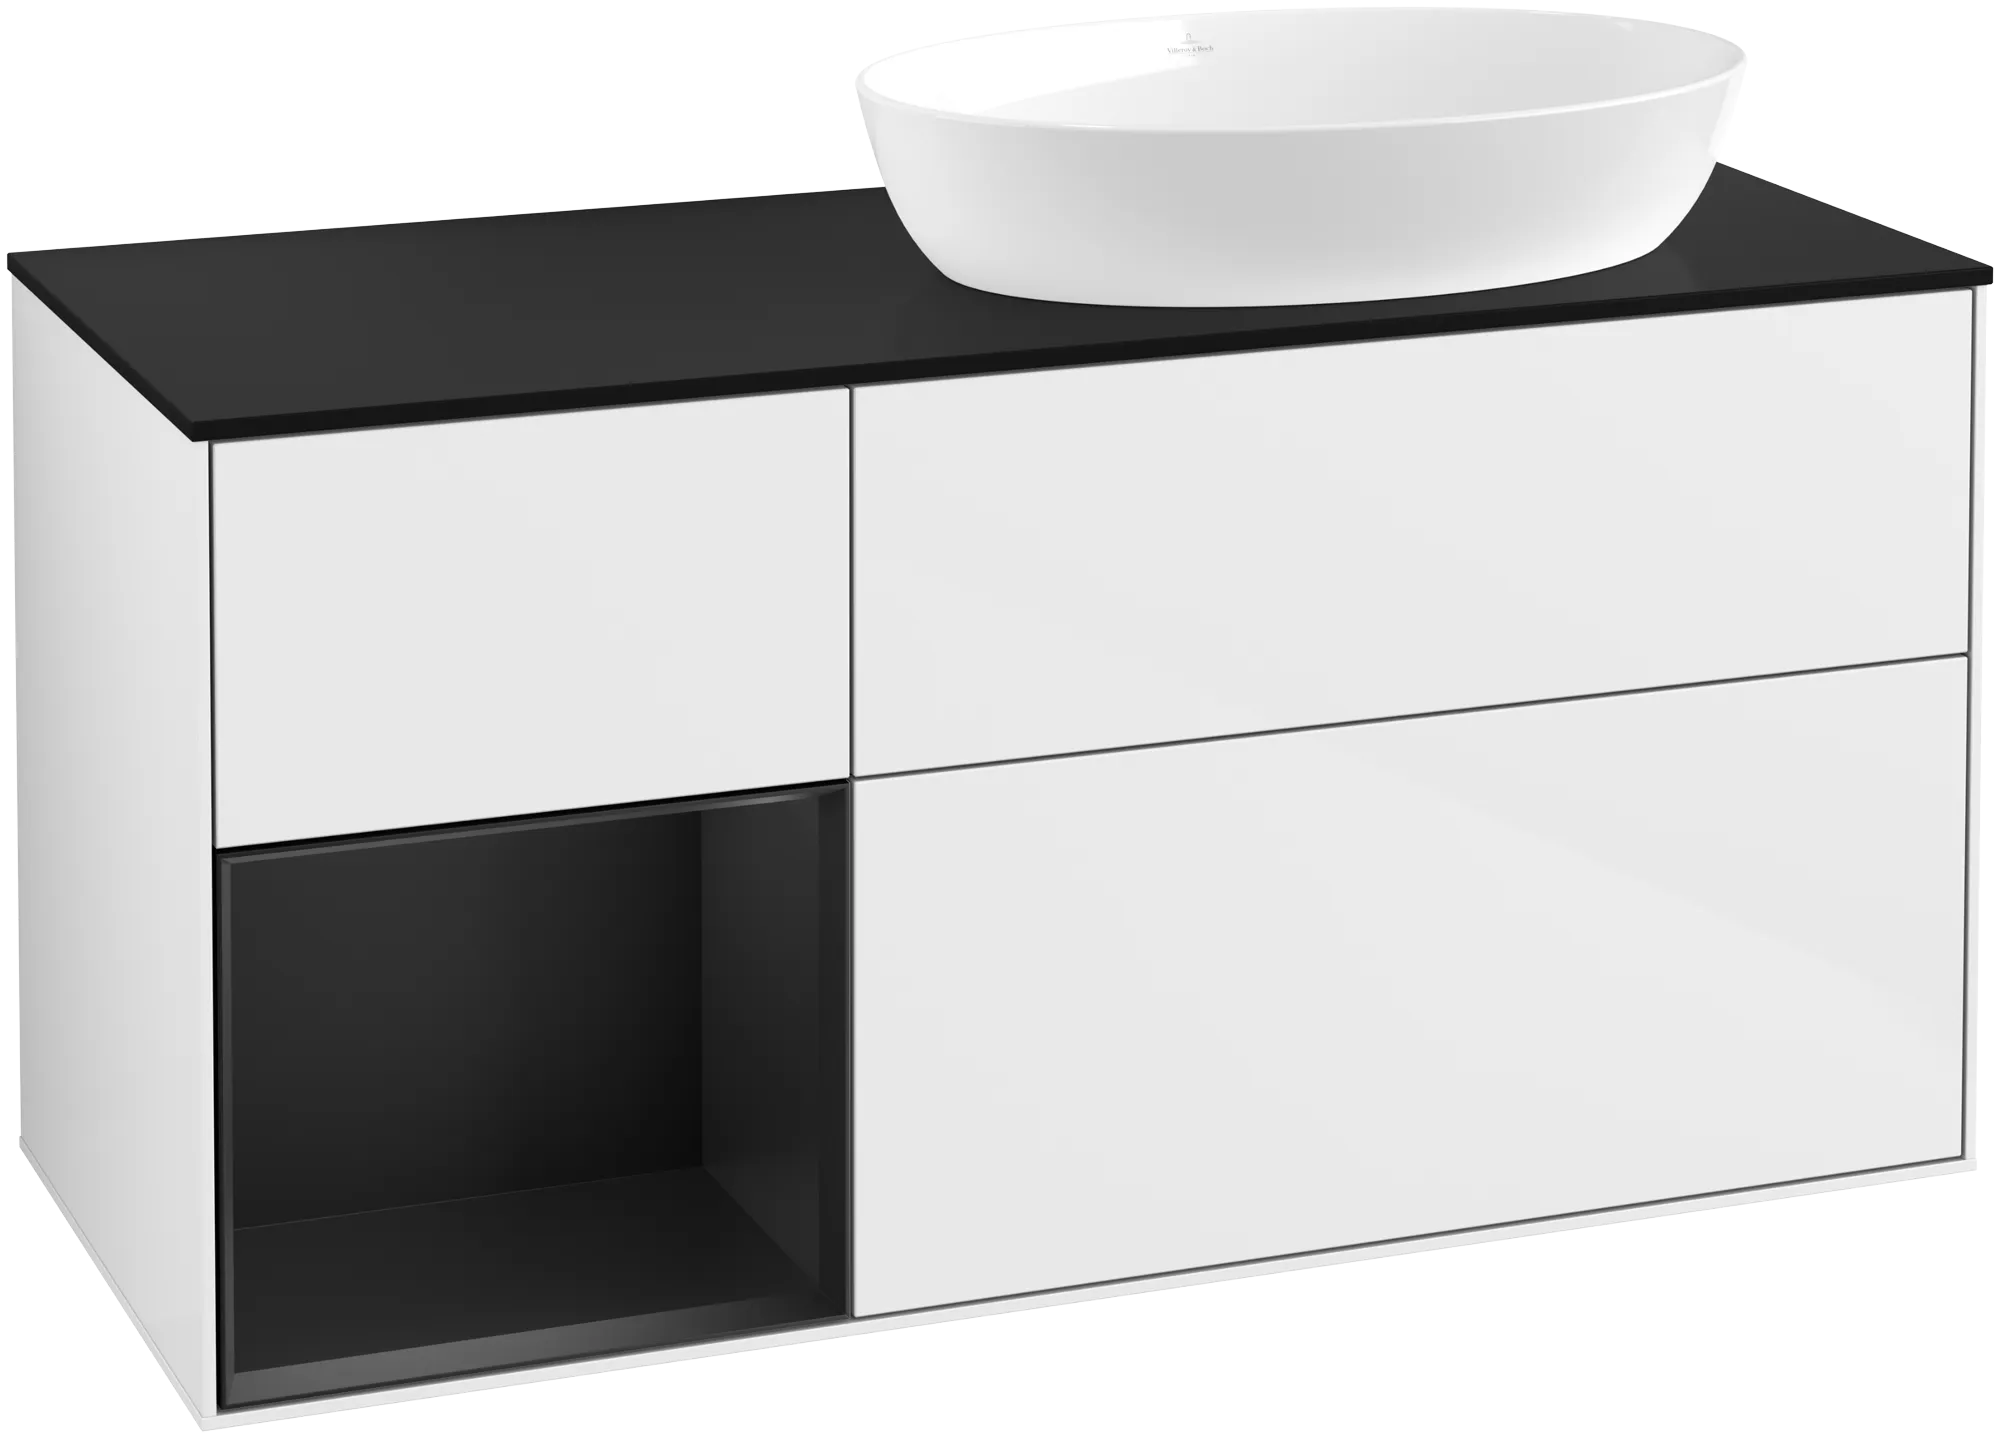 Picture of VILLEROY BOCH Finion Vanity unit, with lighting, 3 pull-out compartments, 1200 x 603 x 501 mm, Glossy White Lacquer / Black Matt Lacquer / Glass Black Matt #FA42PDGF